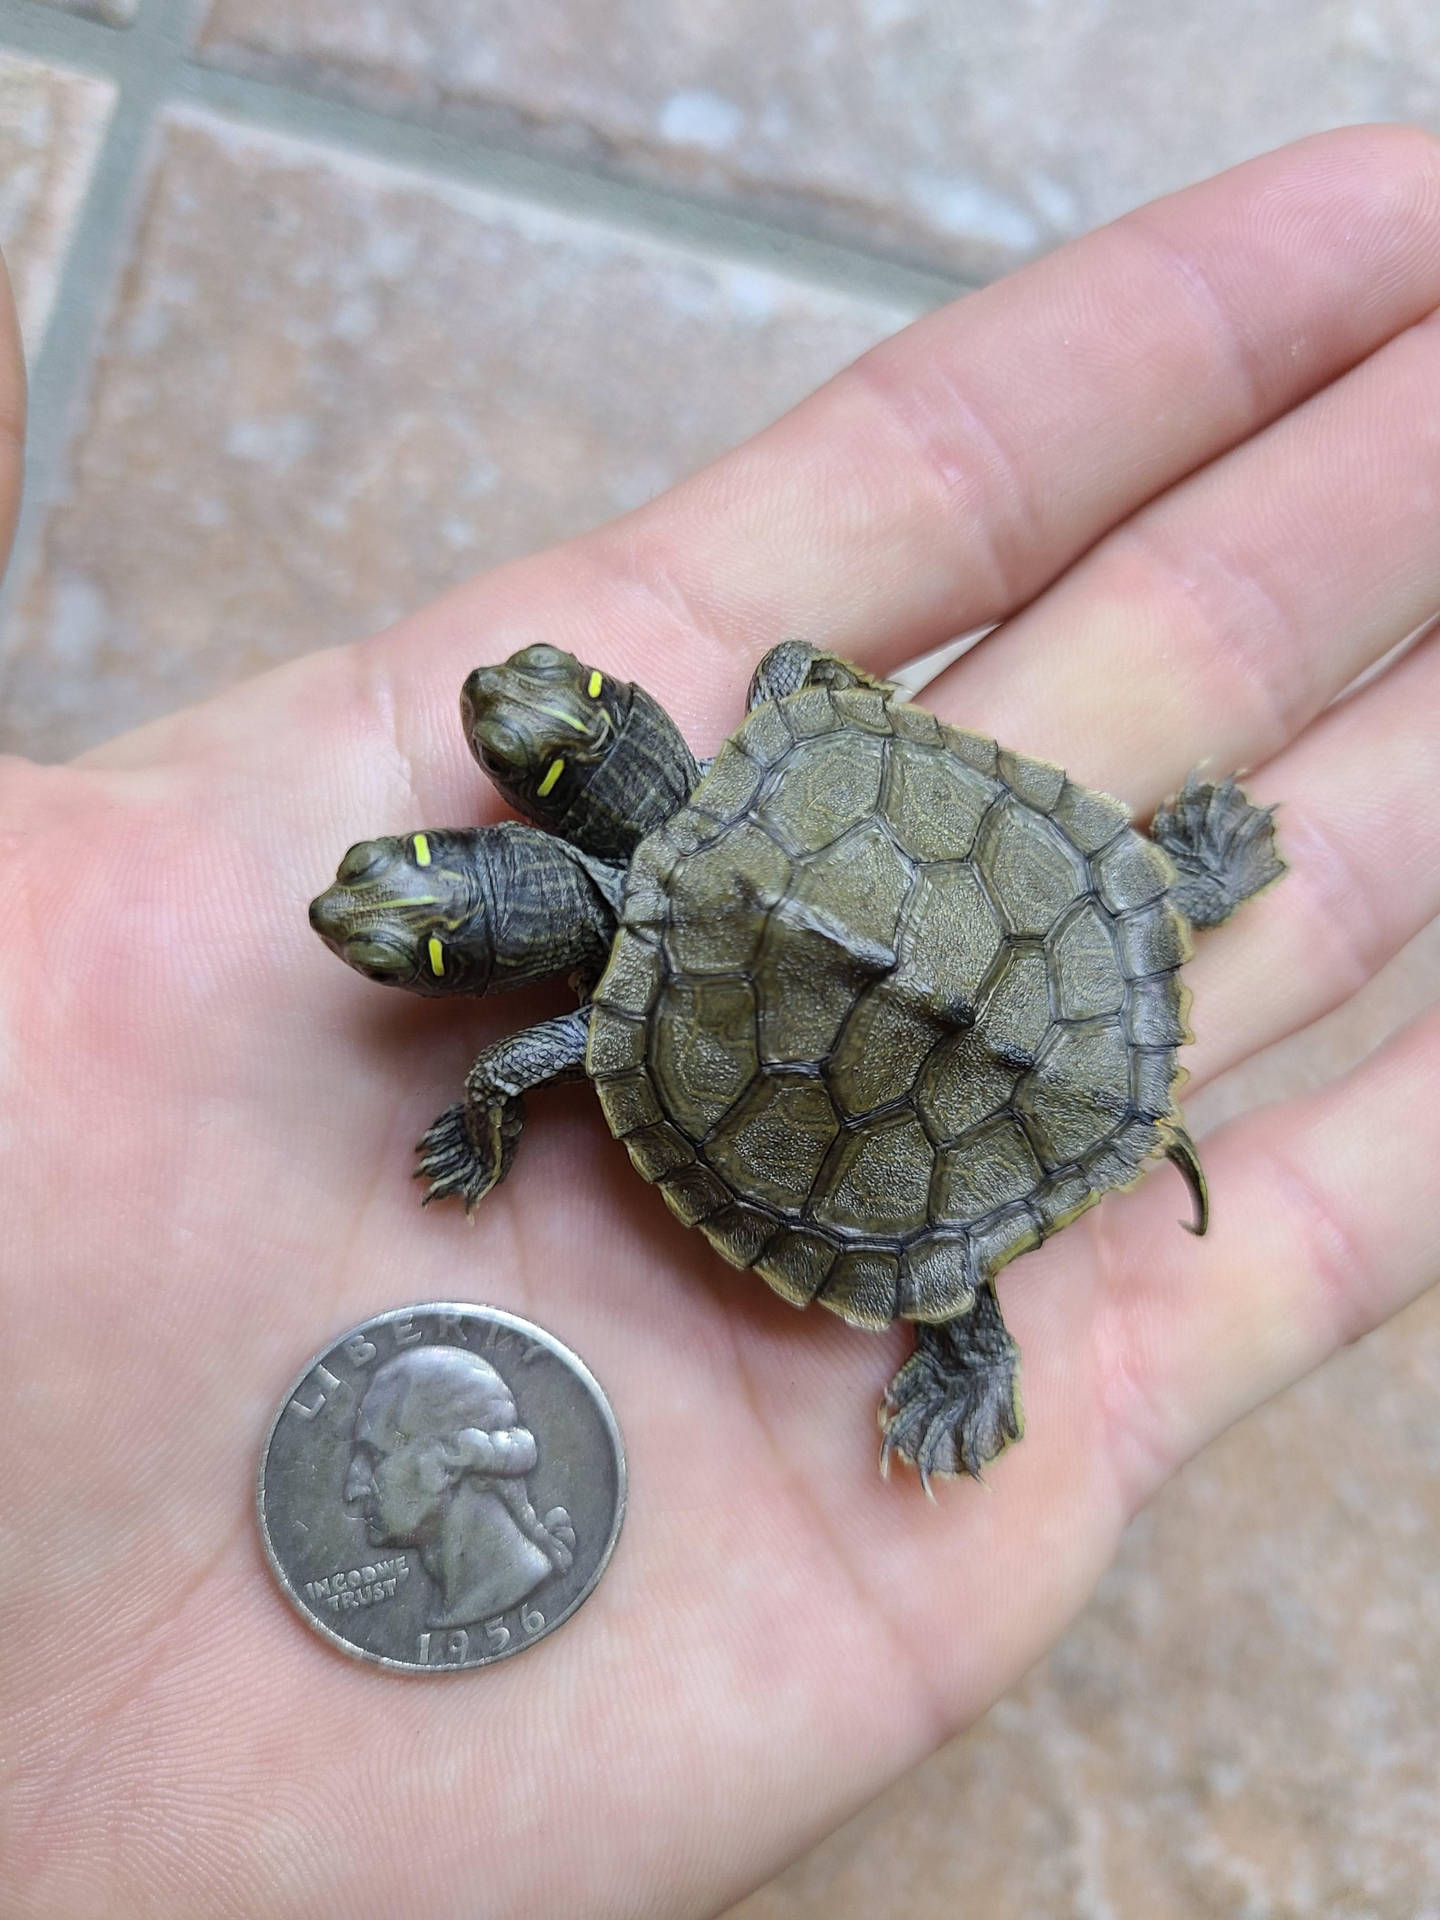 Size Of Two-headed False Map Turtle Wallpaper